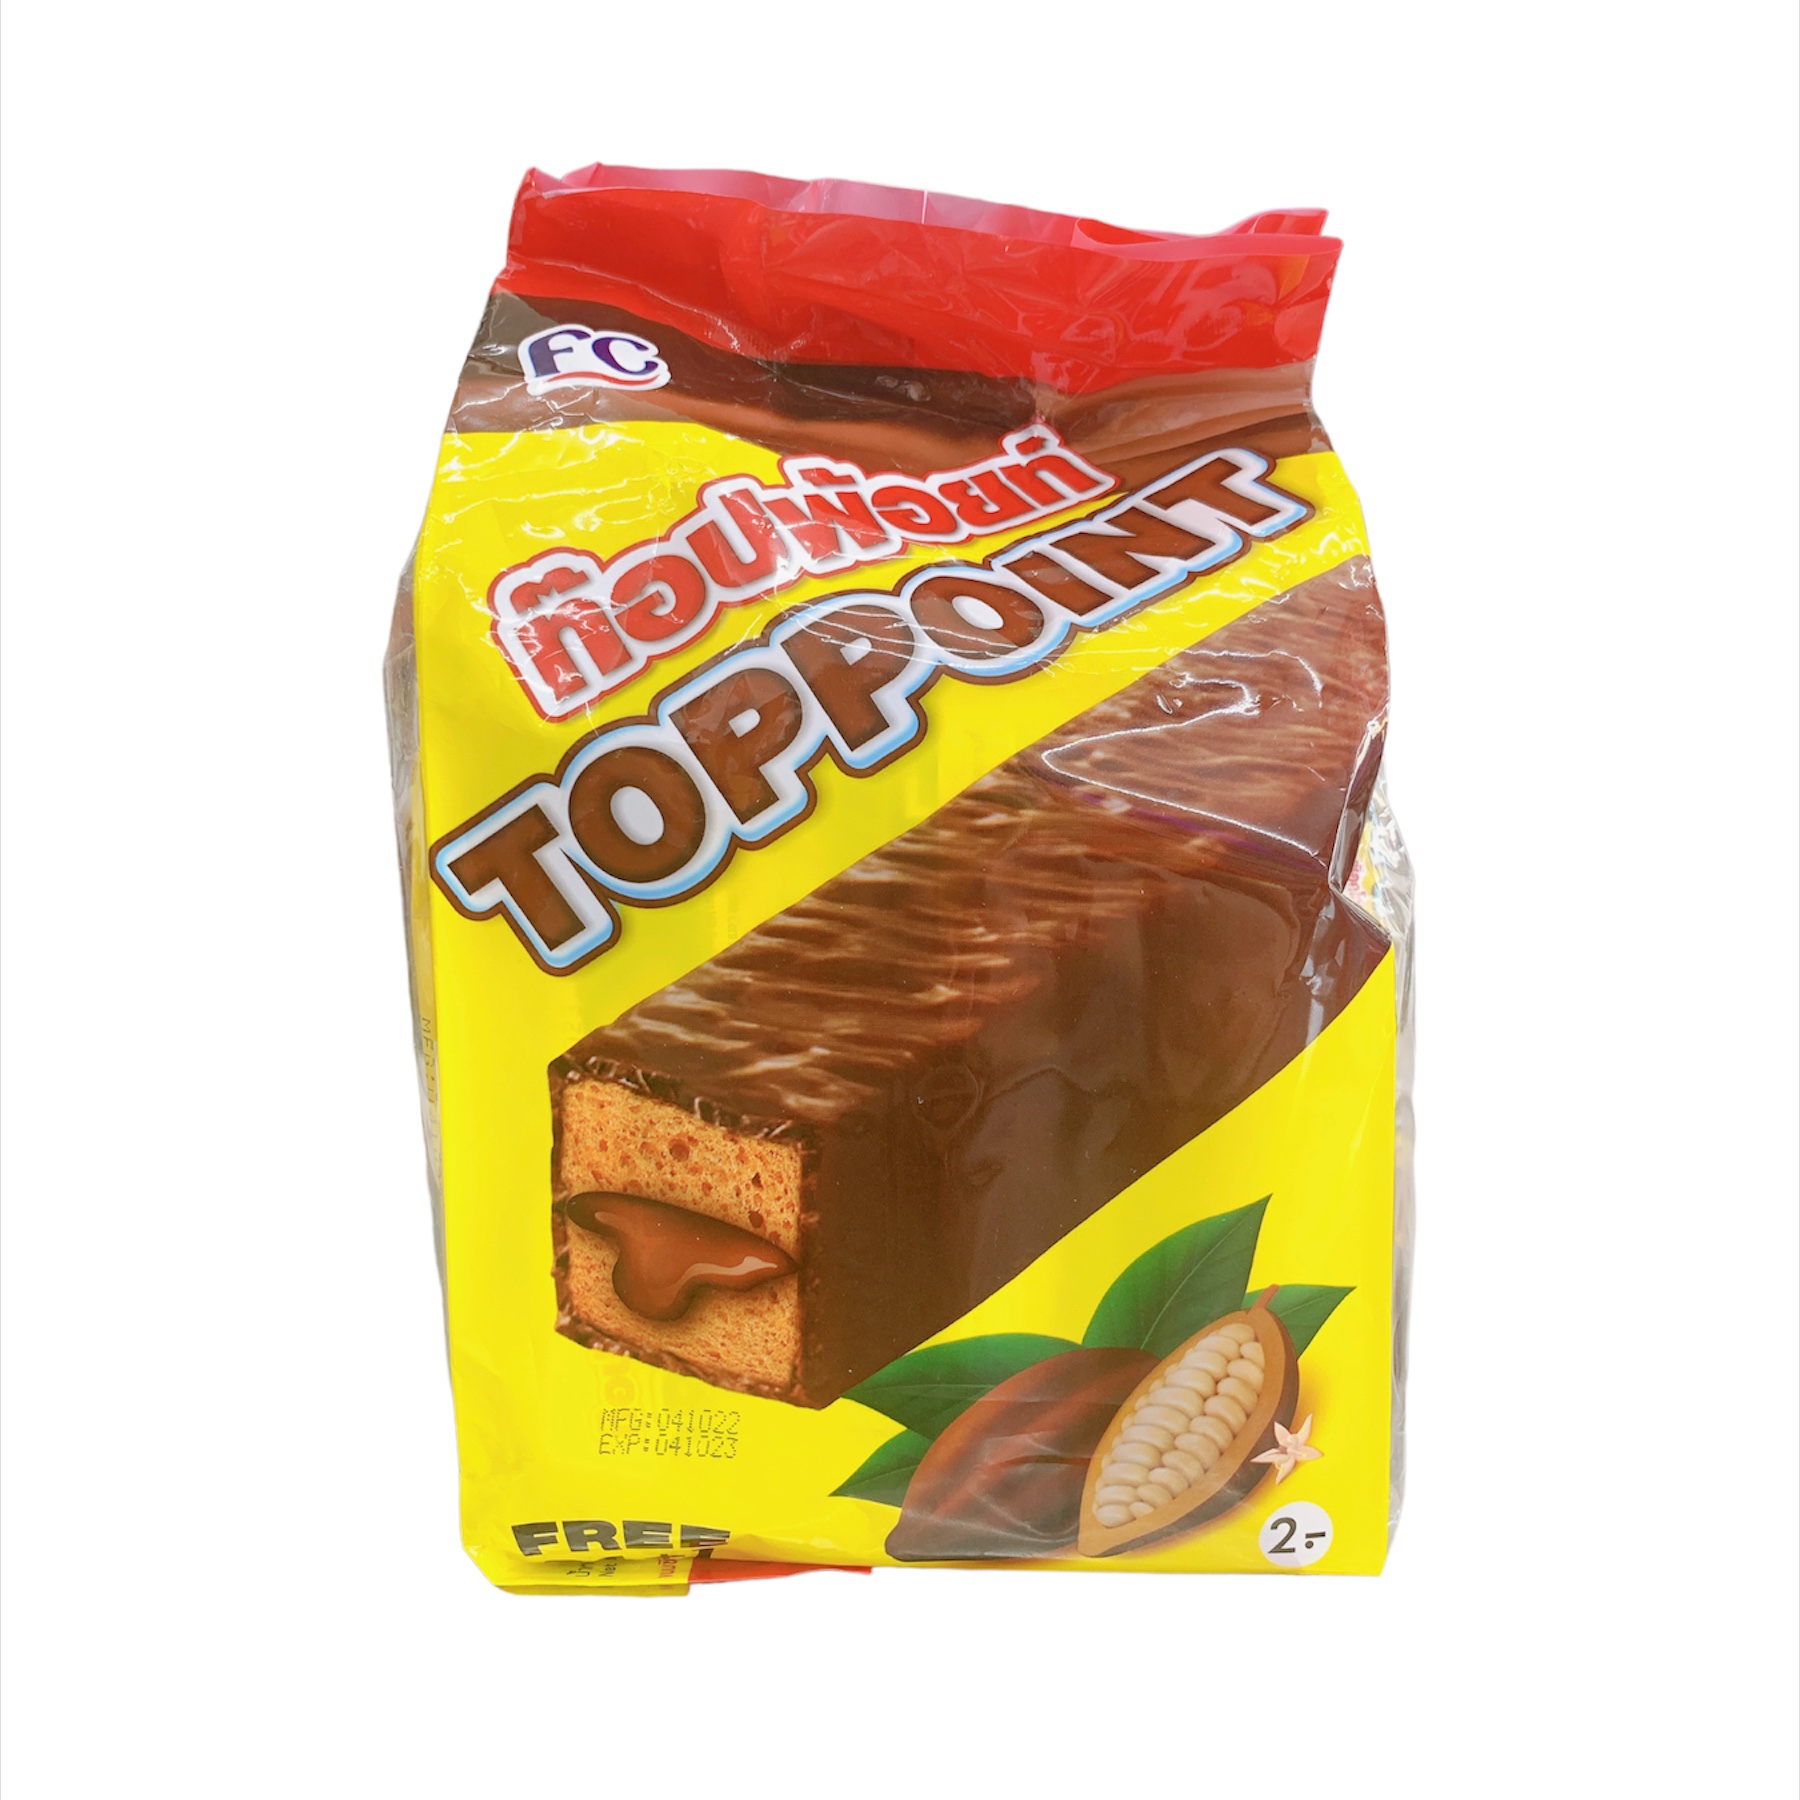 Bánh Xốp FC Toppoint - Chocolate (24+1)